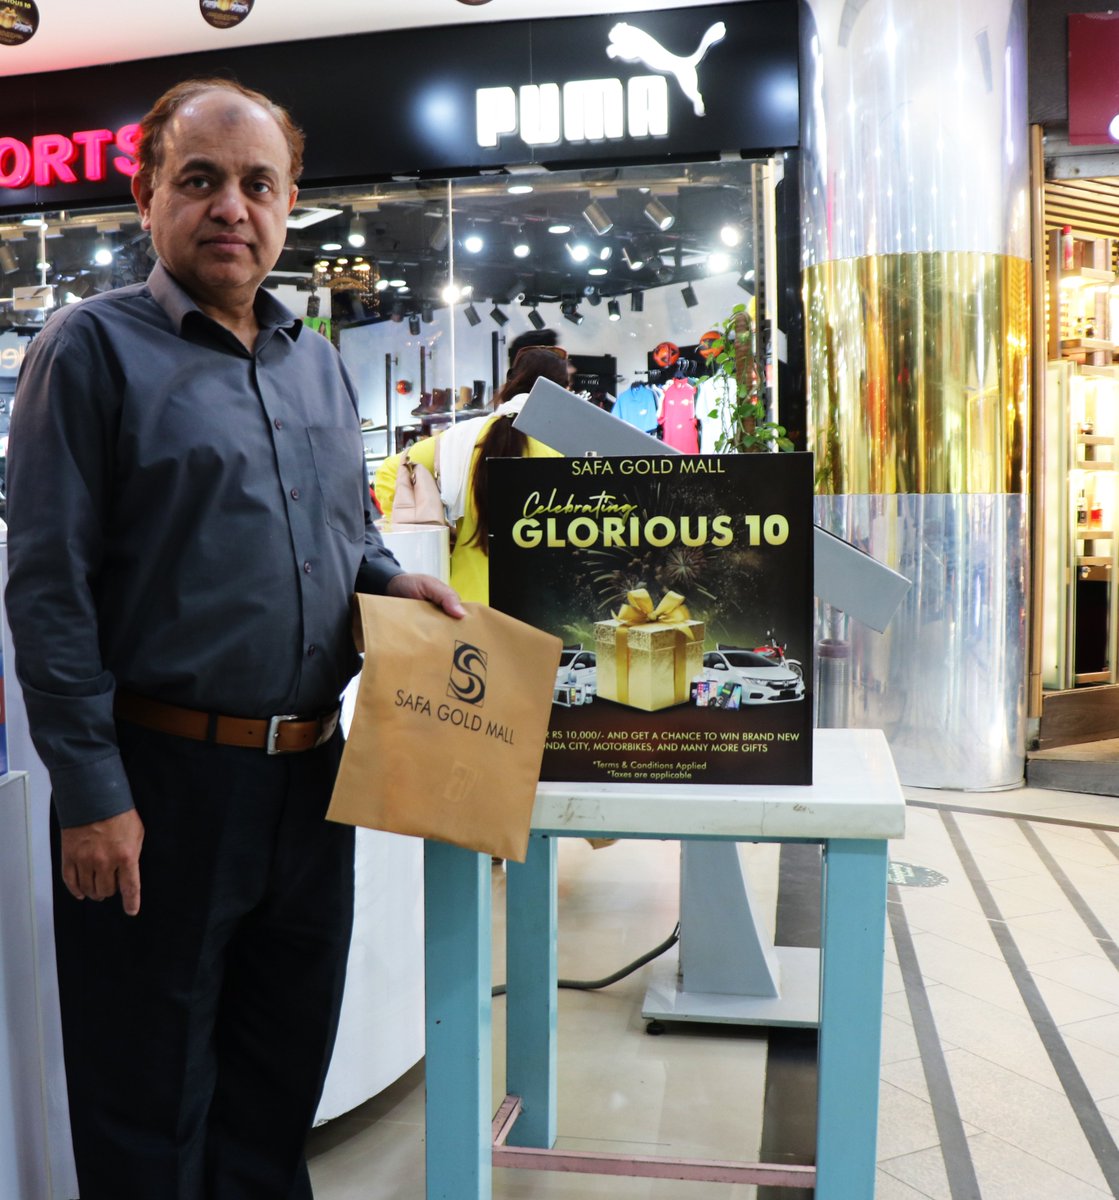 Meet Sohail Atif, our Day 2 lucky draw winner! Watch as she beams with joy while receiving her prize at Safa Gold Mall.

#safagoldmall #safagold #chandraat #mehndinight #celebration #10yearscelebration #luckydrawwinner